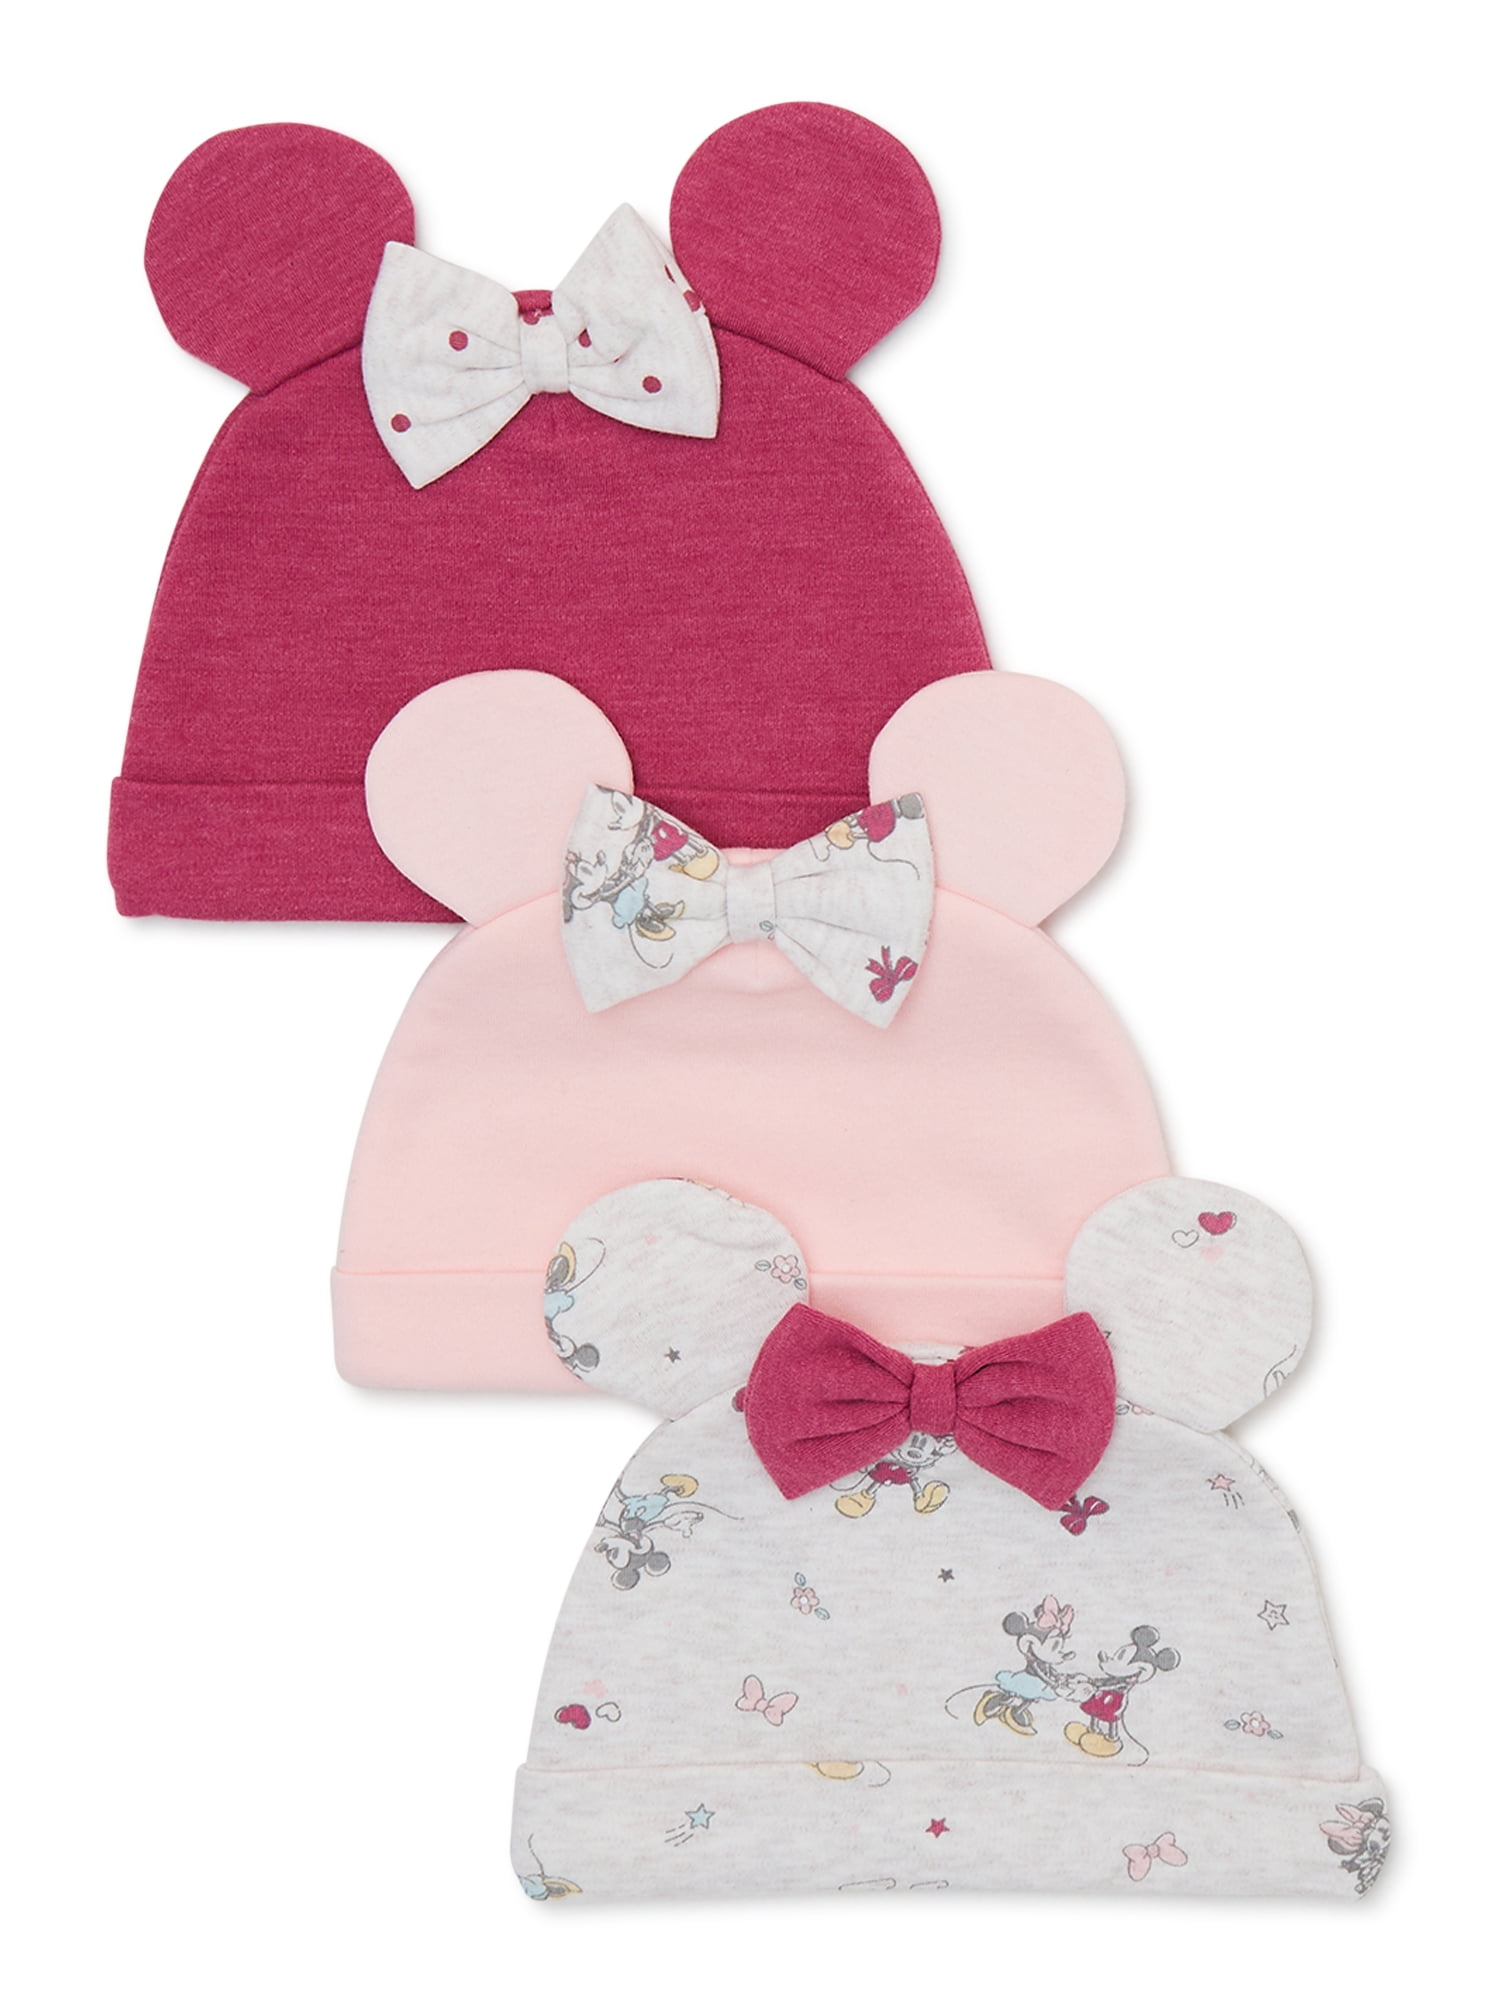 Disney Baby Wishes + Dreams Minnie Mouse Baby Boys and Girls Unisex Caps, 3-Pack, Sizes 0-12 Months